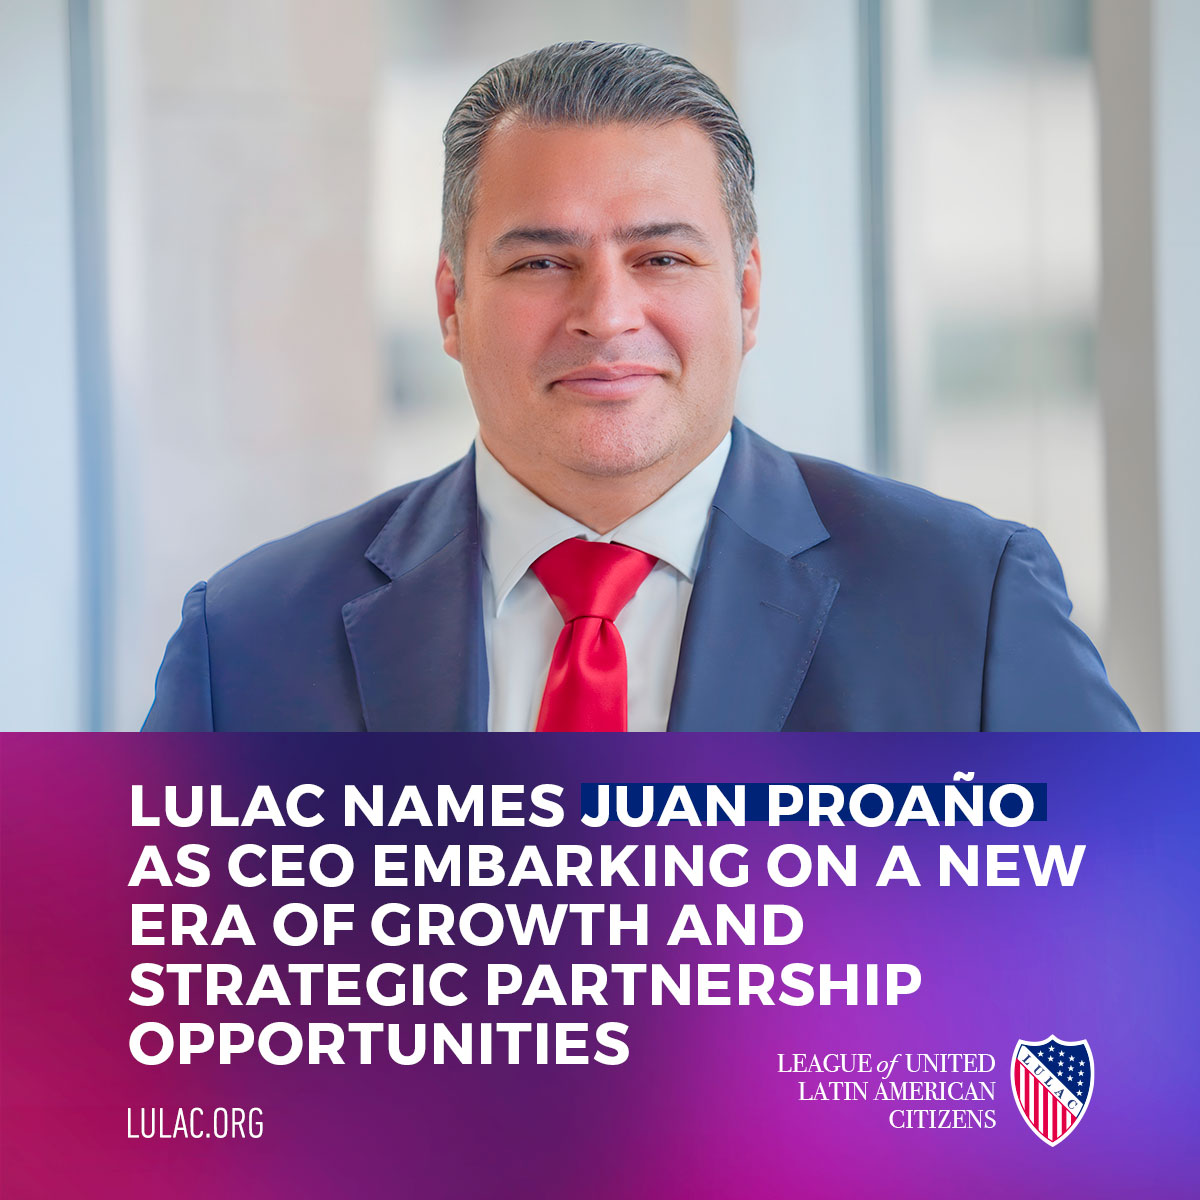 LULAC announced that it has appointed Juan Proaño to serve as Chief Executive Officer of the organization. In addition, Proaño will work to identify new areas for growth and ways to amplify the organization’s advocacy initiatives. Read more > lulac.org/news